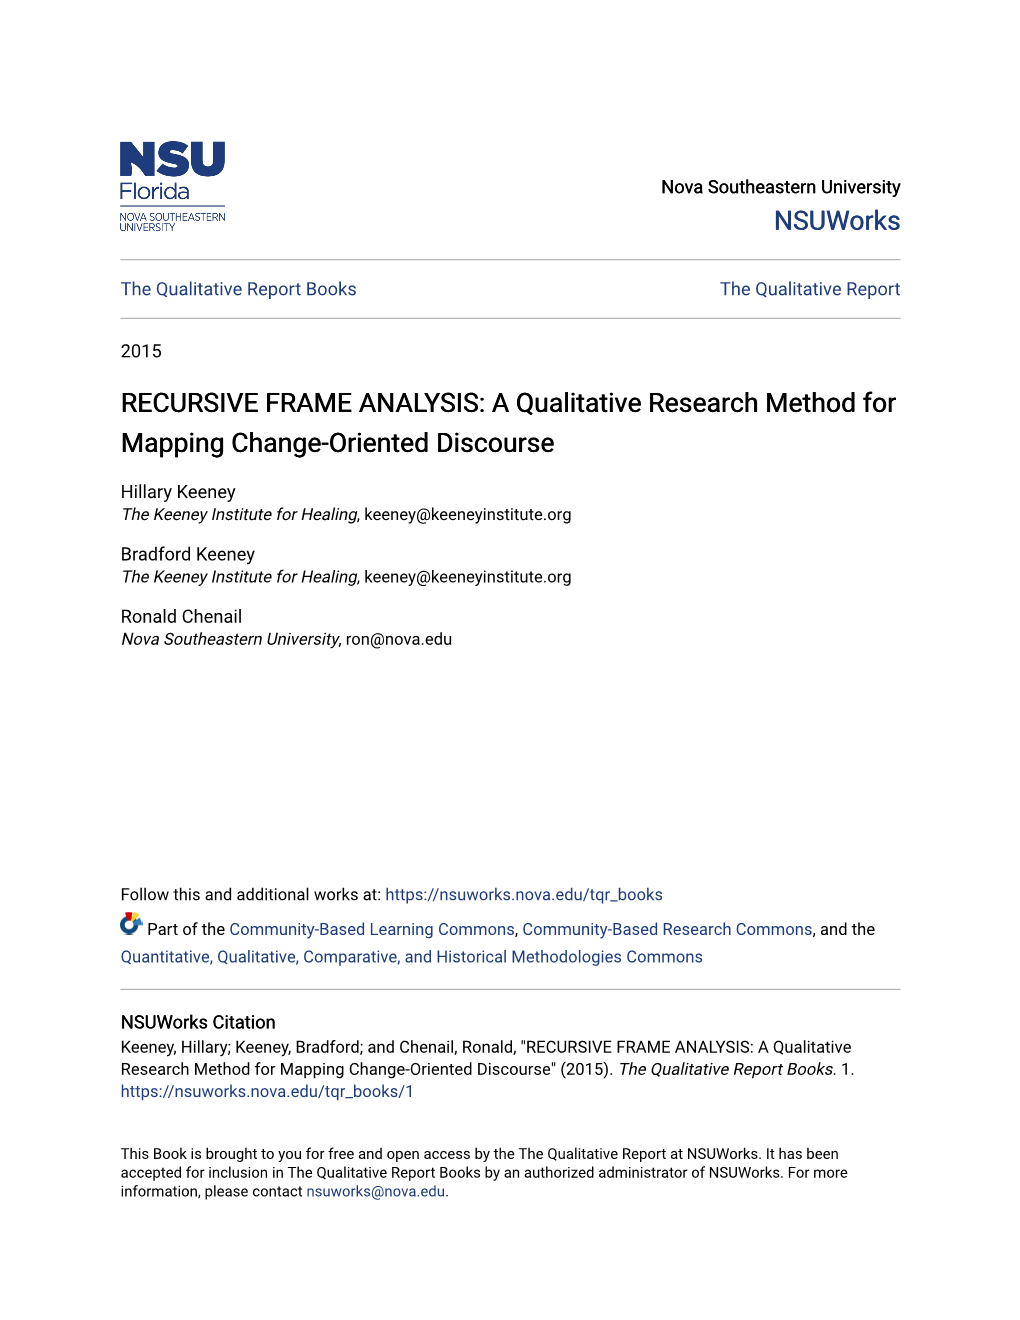 RECURSIVE FRAME ANALYSIS: a Qualitative Research Method for Mapping Change-Oriented Discourse